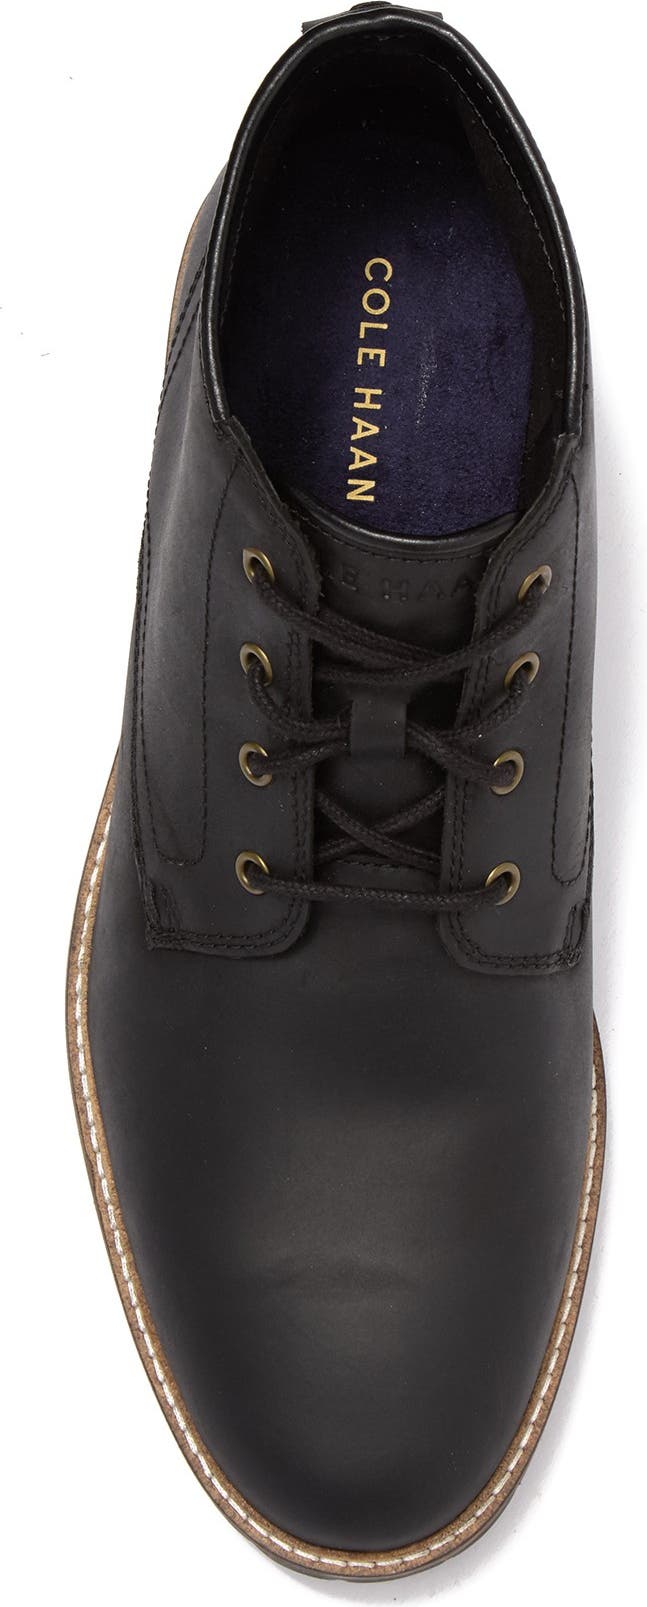 COLE HAAN Nathan Leather Chukka Boot, Alternate, color, BLACK